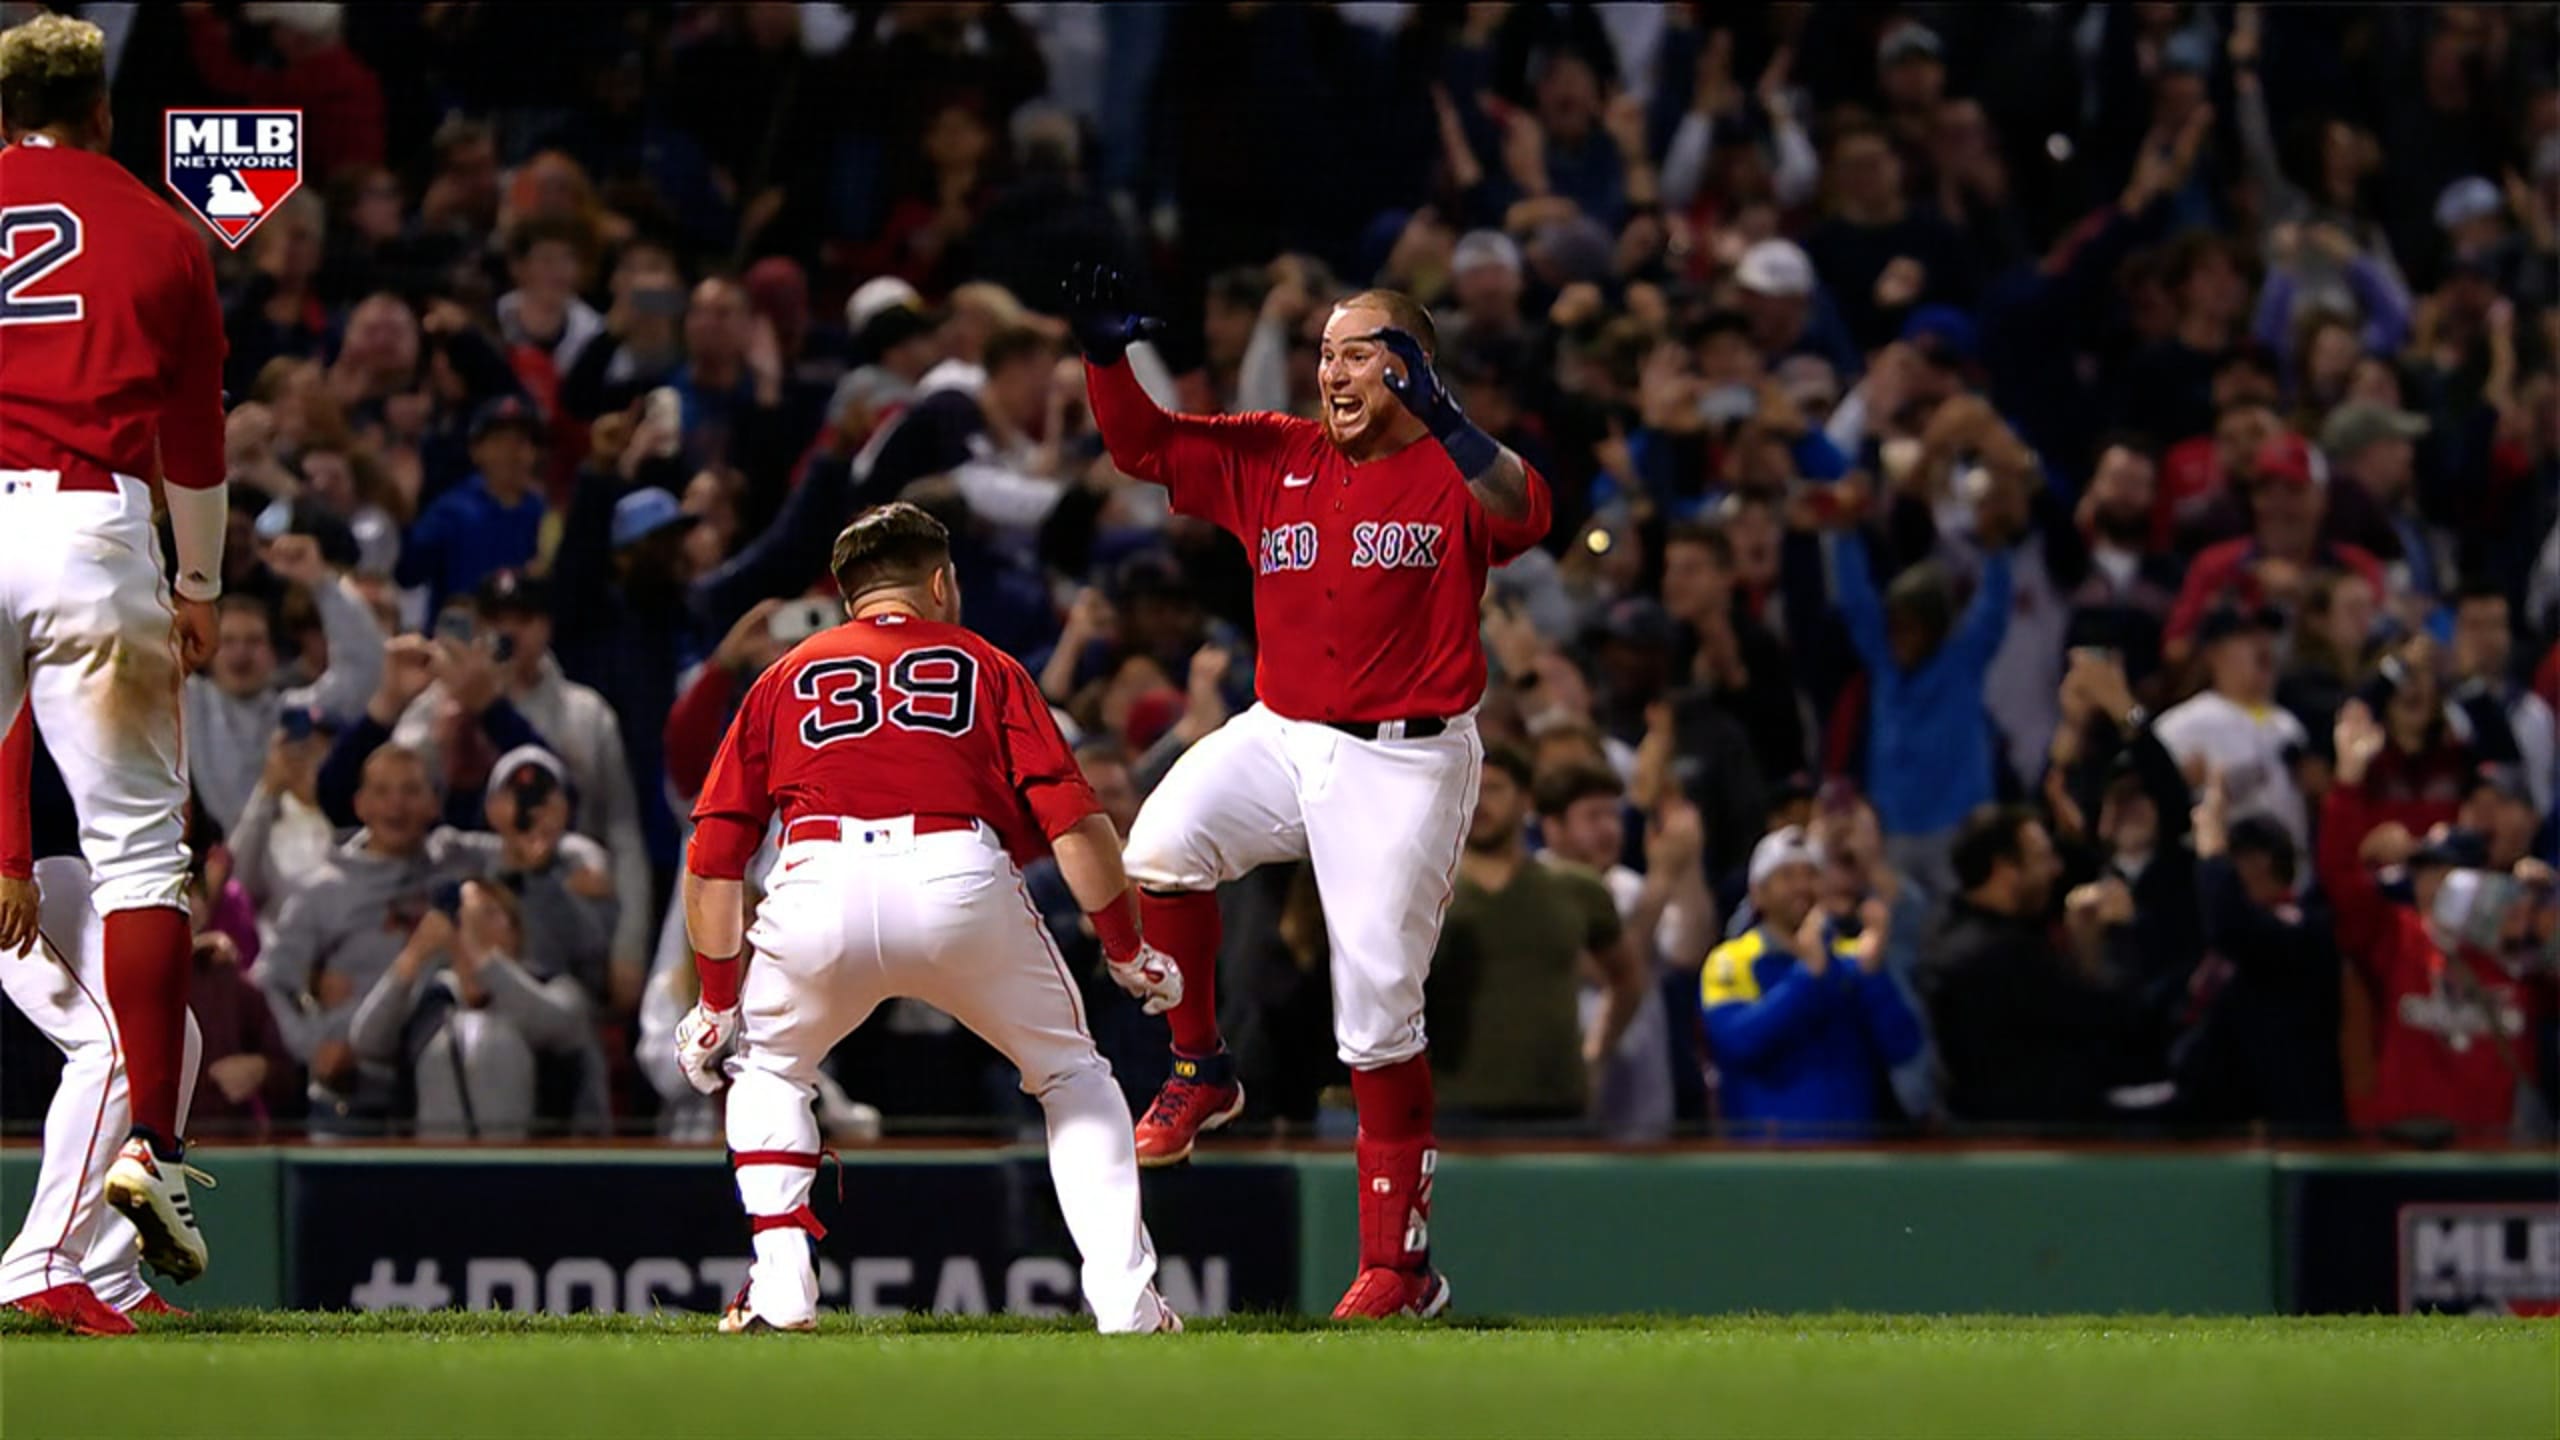 Christian Vázquez belts walkoff homer, Boston Red Sox win 6-4 in 13 innings  in Game 3 of the ALDS 